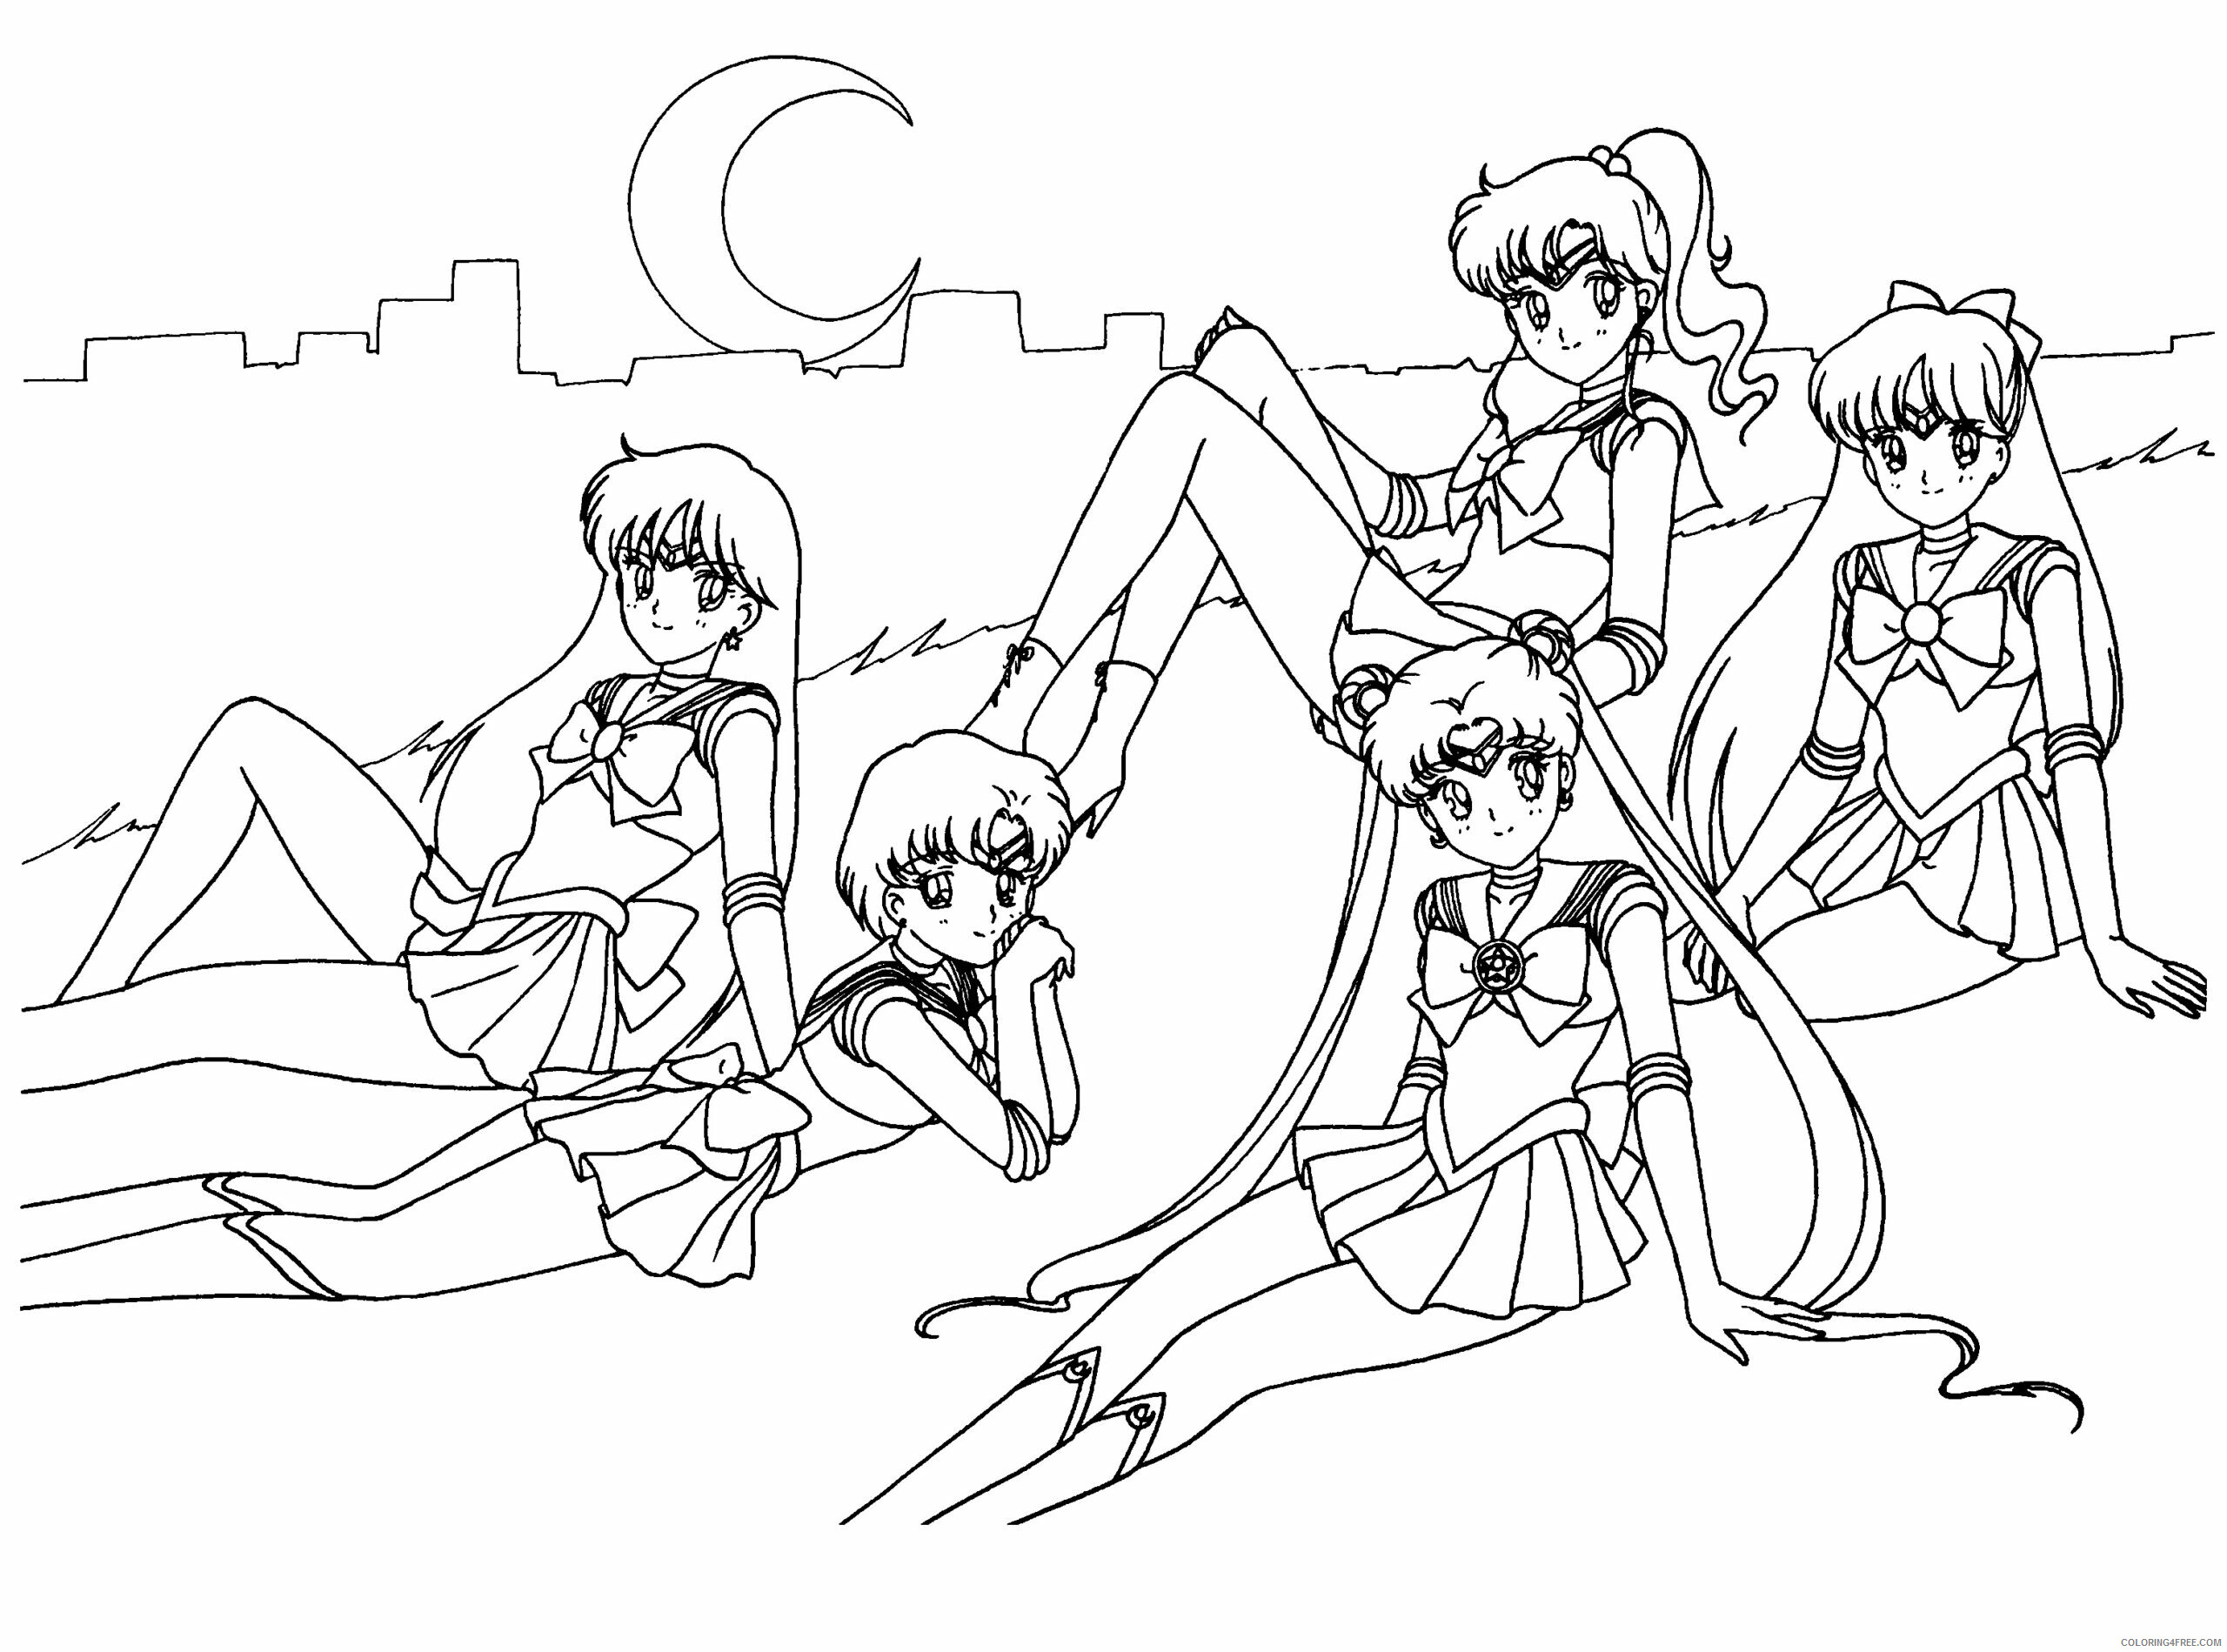 Sailor Moon Printable Coloring Pages Anime sailormoon GlKBx 2021 0988 Coloring4free